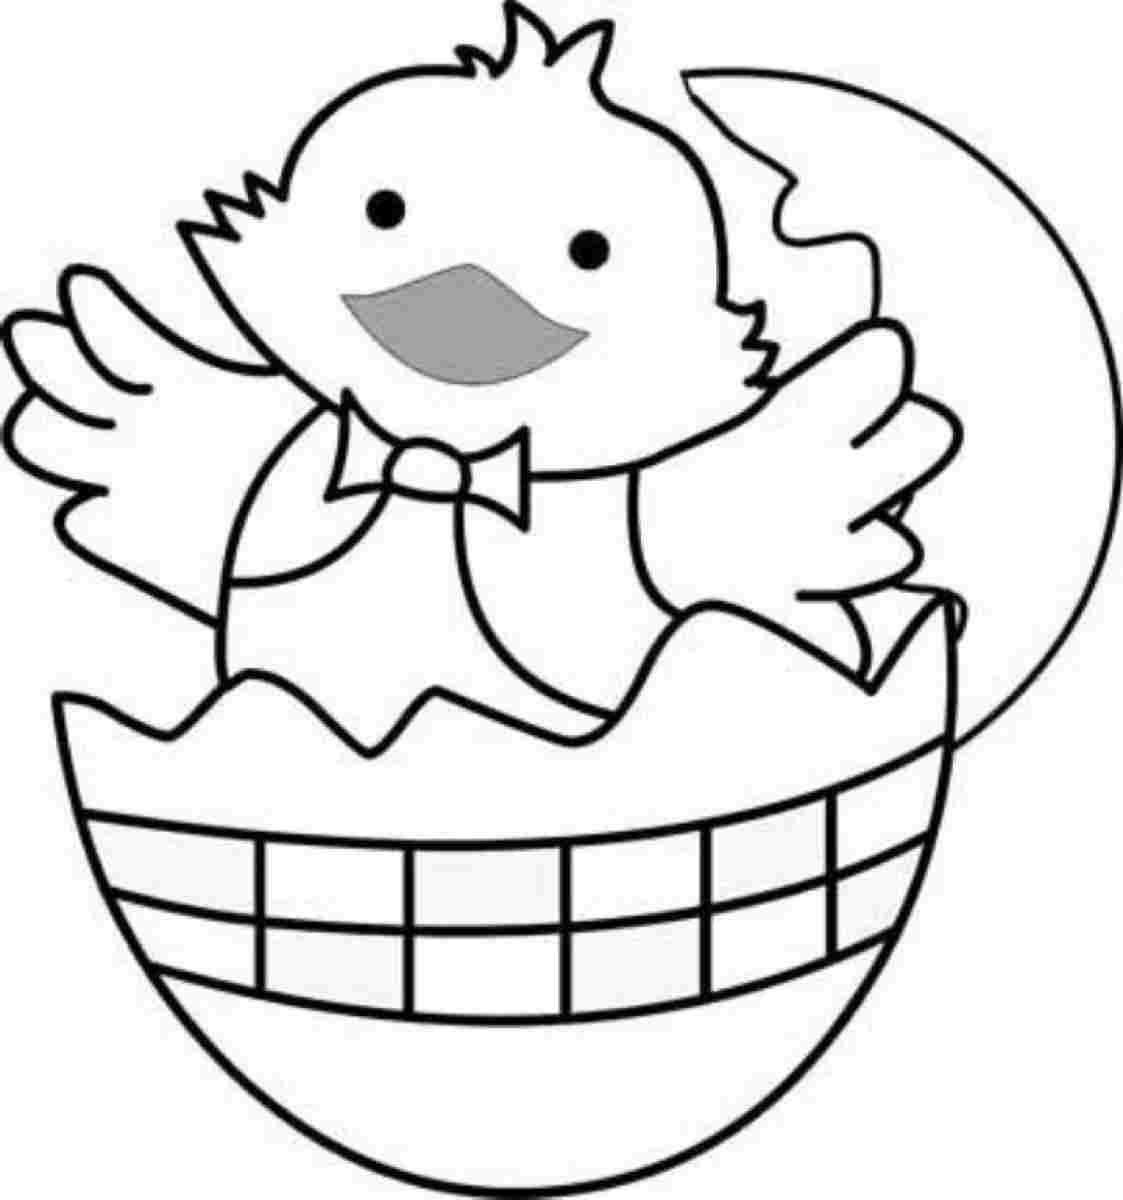 7 Pics of Chick Coloring Pages Printable - Chick Coloring Page ...